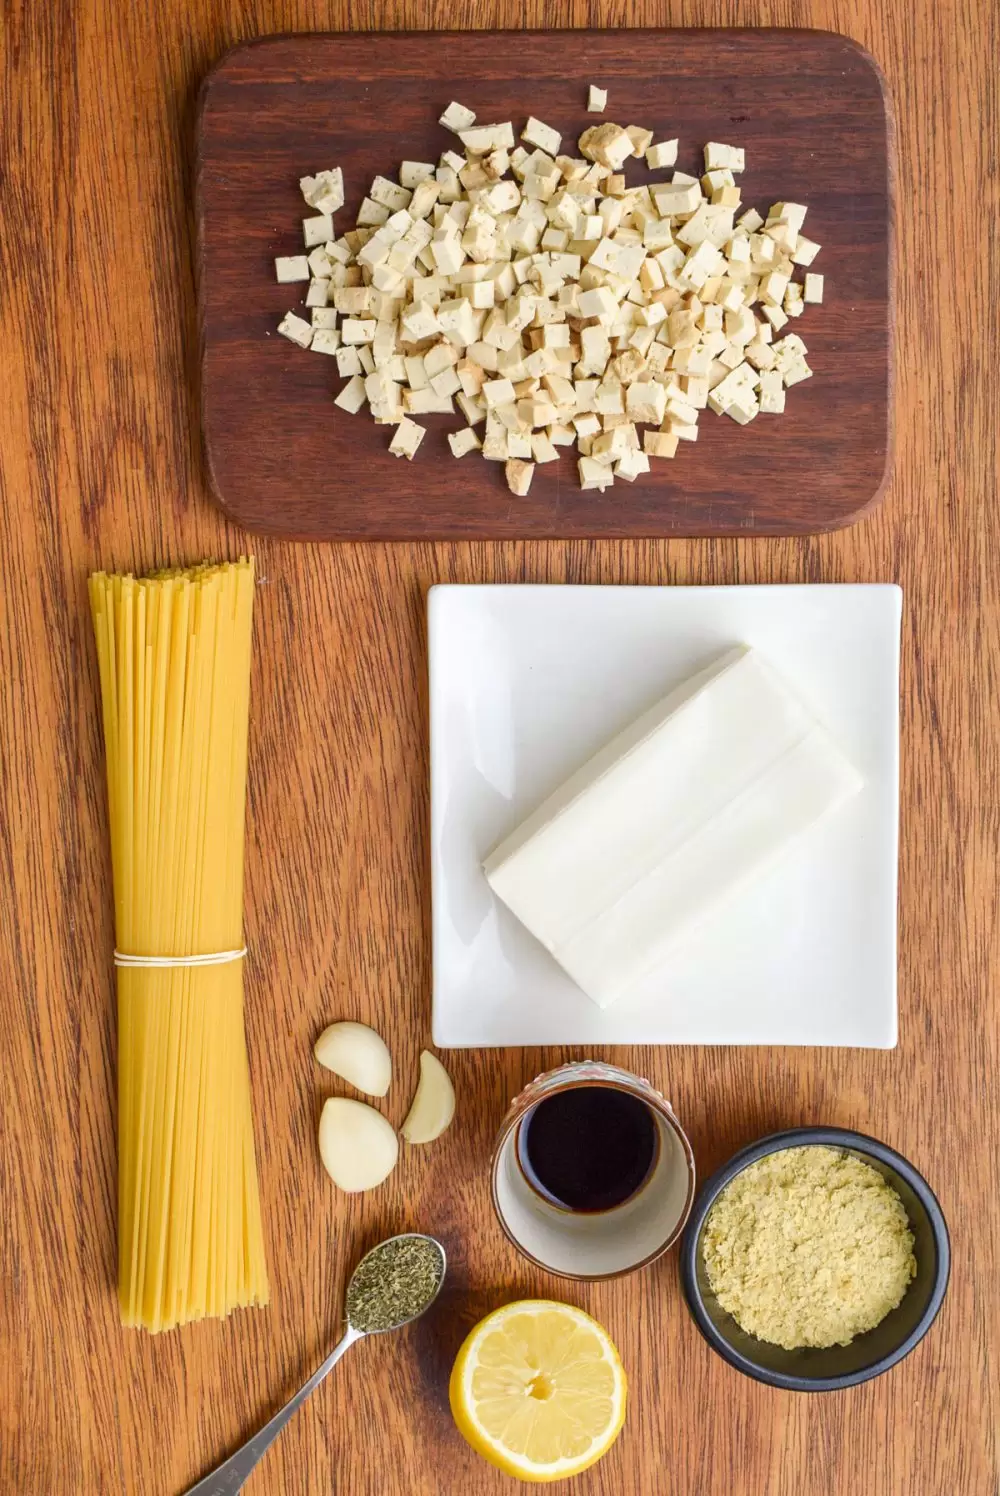 Ingredients for the vegan carbonara - a block of silken tofu, diced smoked tofu, a bunch of spaghetti, garlic cloves, herbs, half a lemon, soy sauce and nutritional yeast.